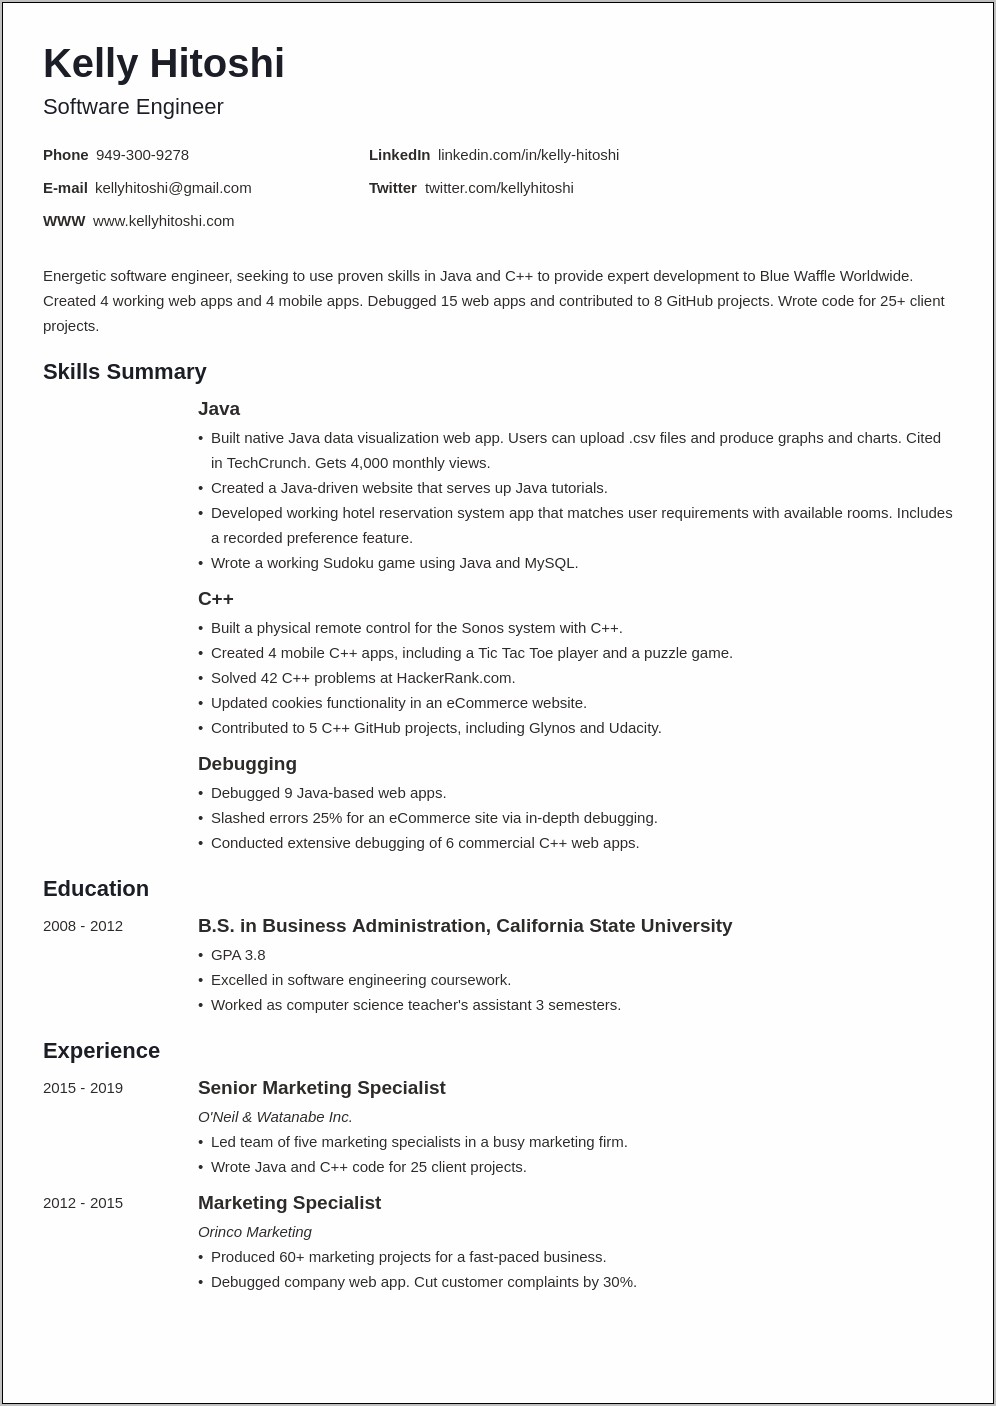 Best Career Objective For Resume Examples